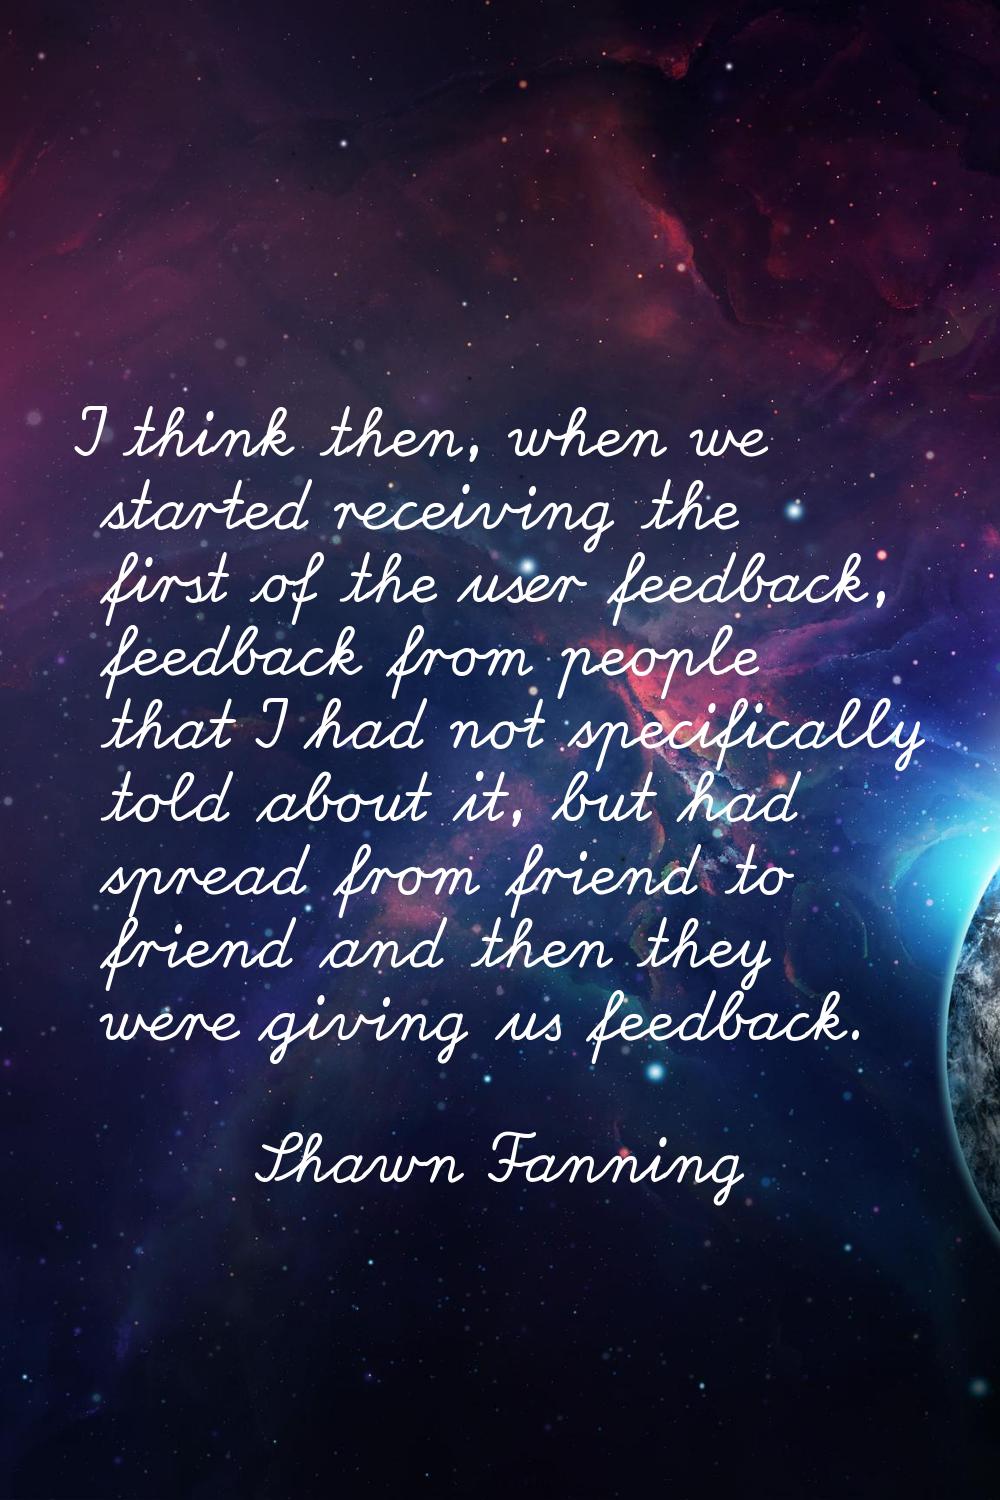 I think then, when we started receiving the first of the user feedback, feedback from people that I